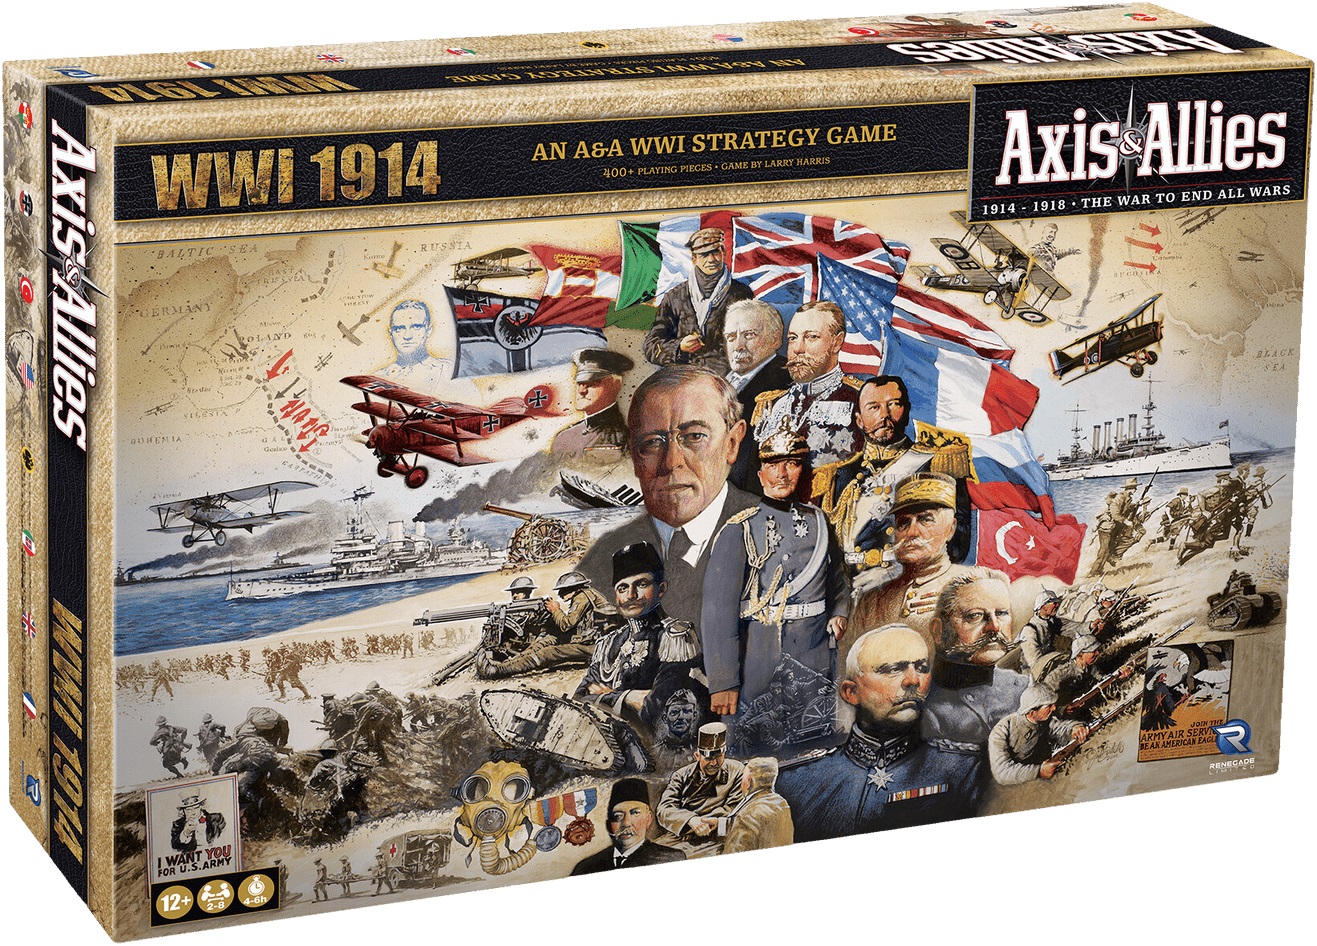 WWI 1914 - Axis & Allies